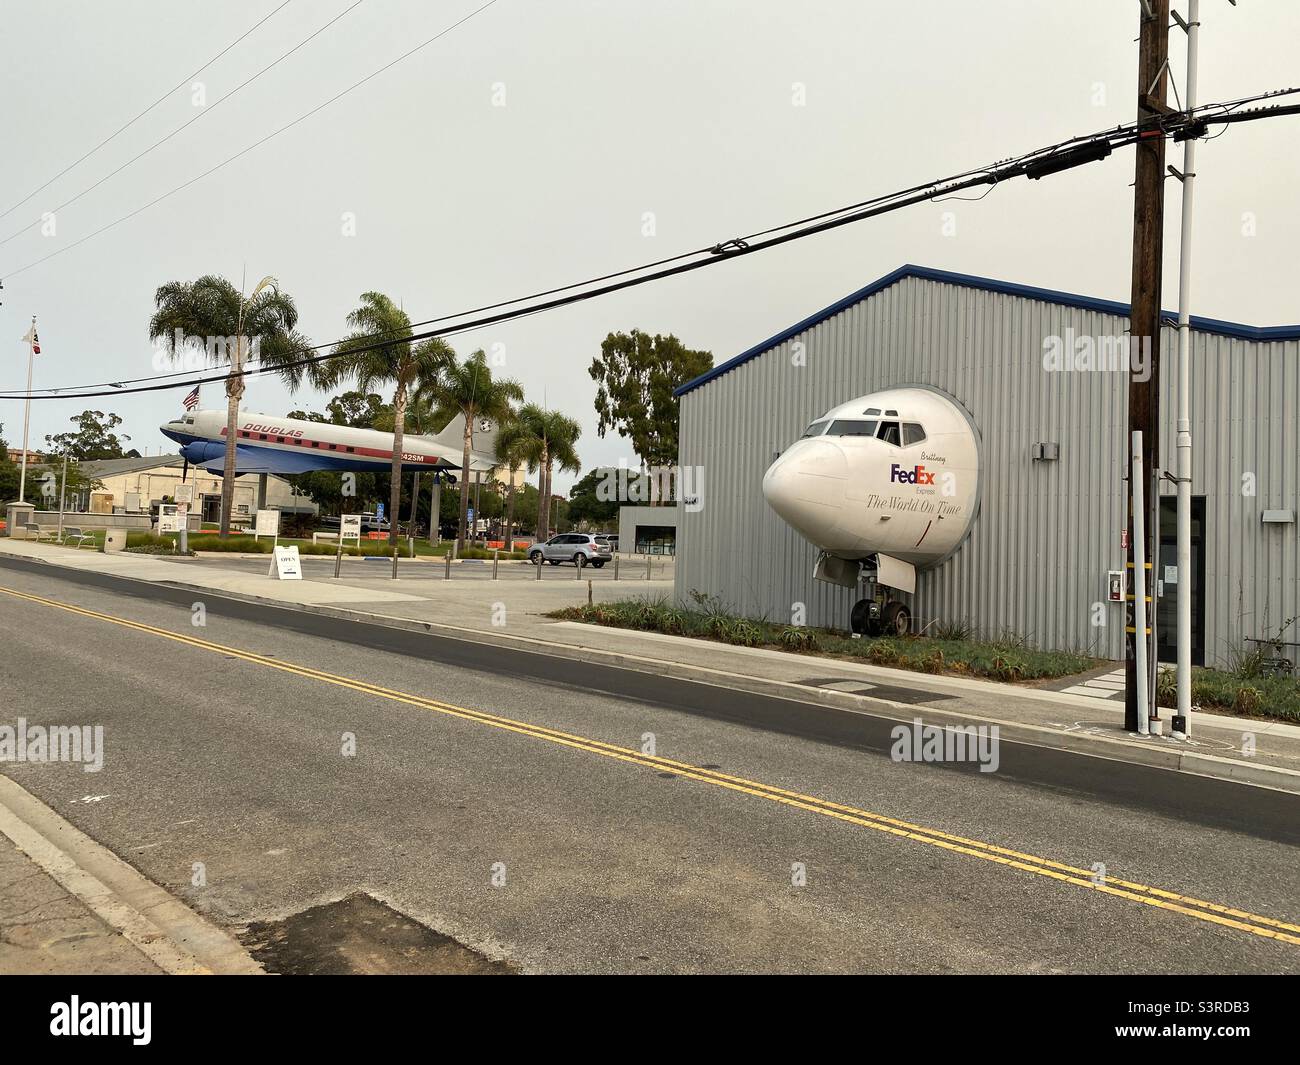 LOS ANGELES, CA, SEP 2021: side view, cockpit of jet aircraft used by FedEx appears to come through hangar wall to street with Douglas DC-3 behind at Museum of Flying, Santa Monica Stock Photo